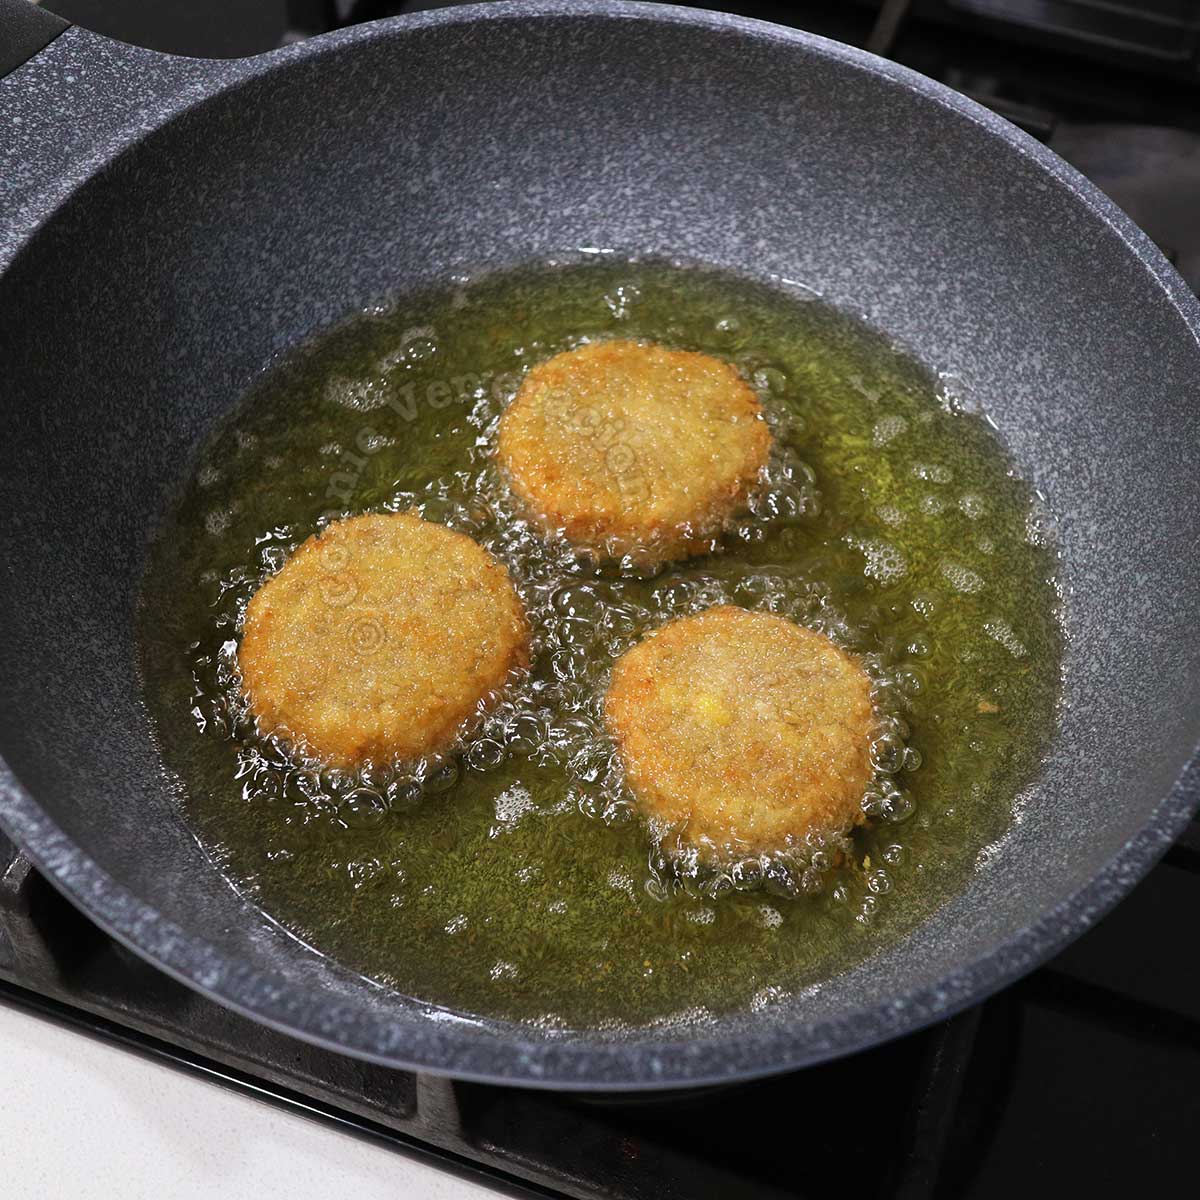 Frying Japanese-style crab cakes